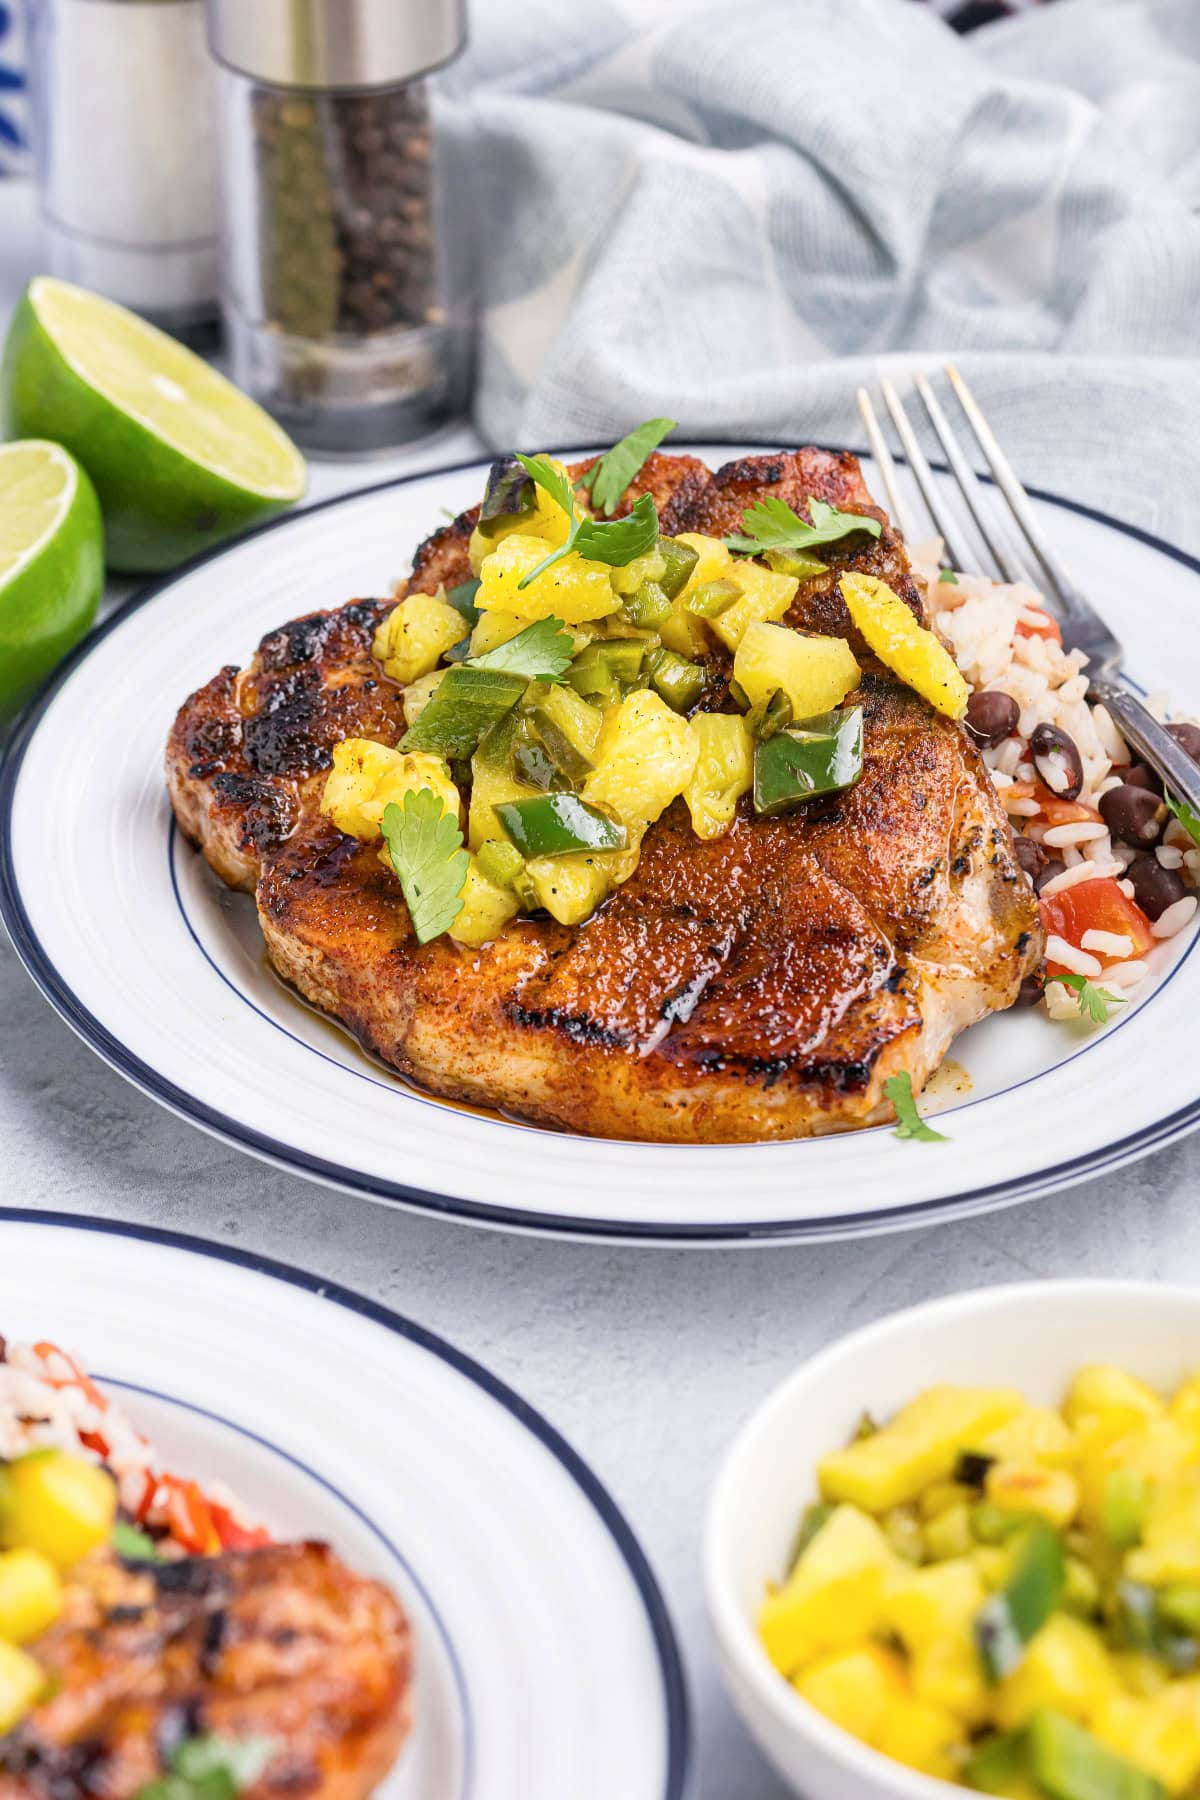 Chili rubbed pork chop topped with pineapple salsa on plate